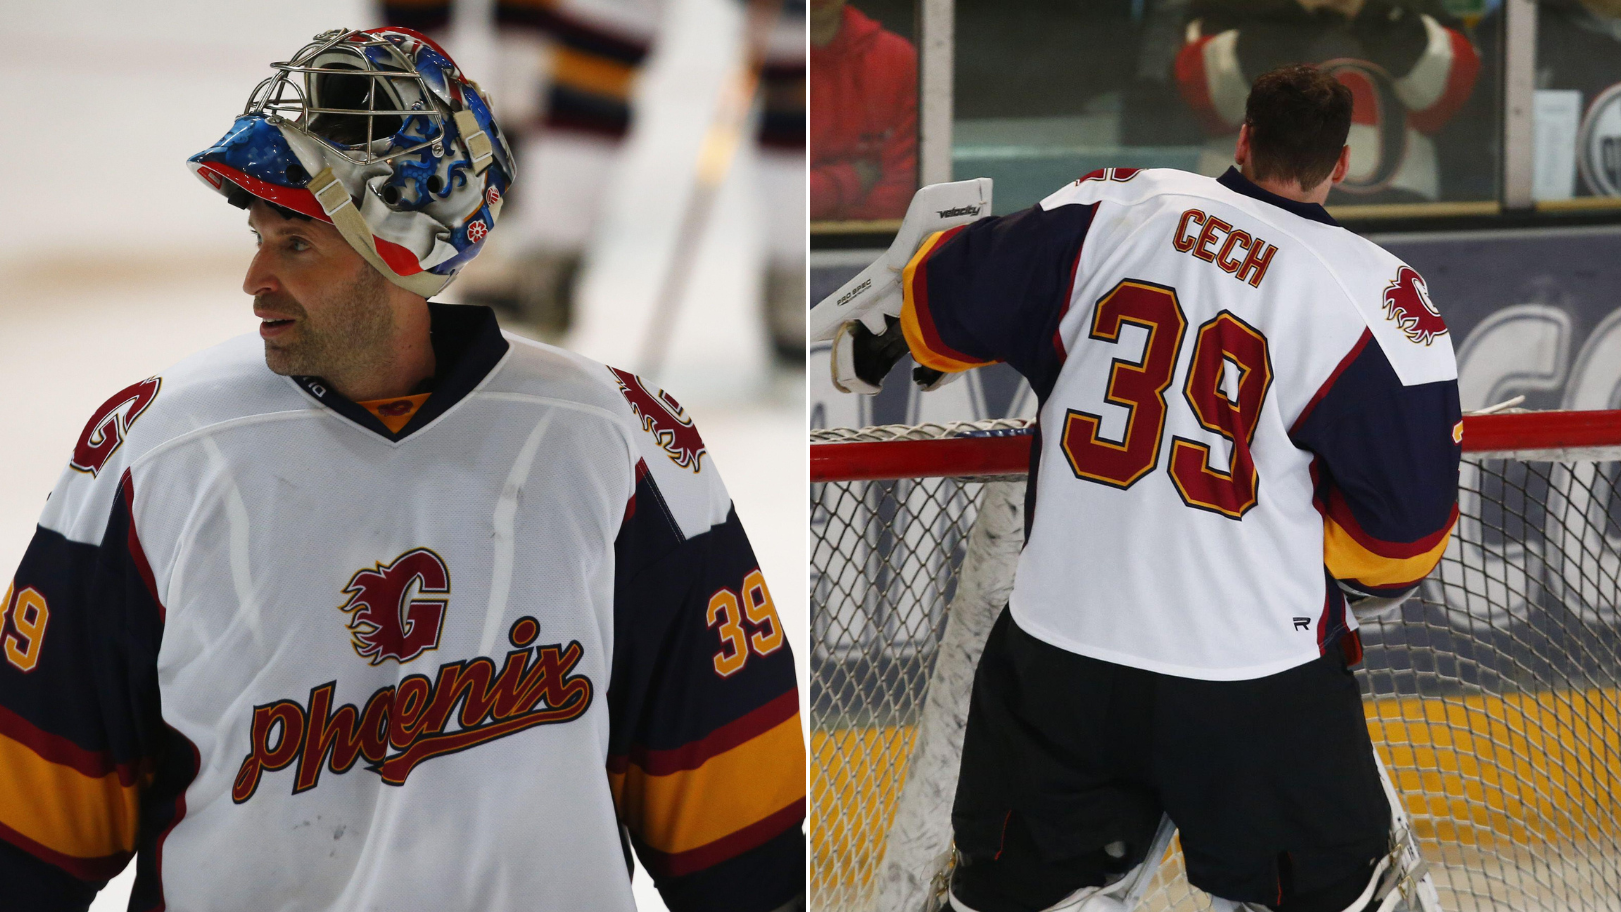 Petr Cech makes 2 penalty saves for Guildford Phoenix in ice hockey debut  (Video) - Obiaks News